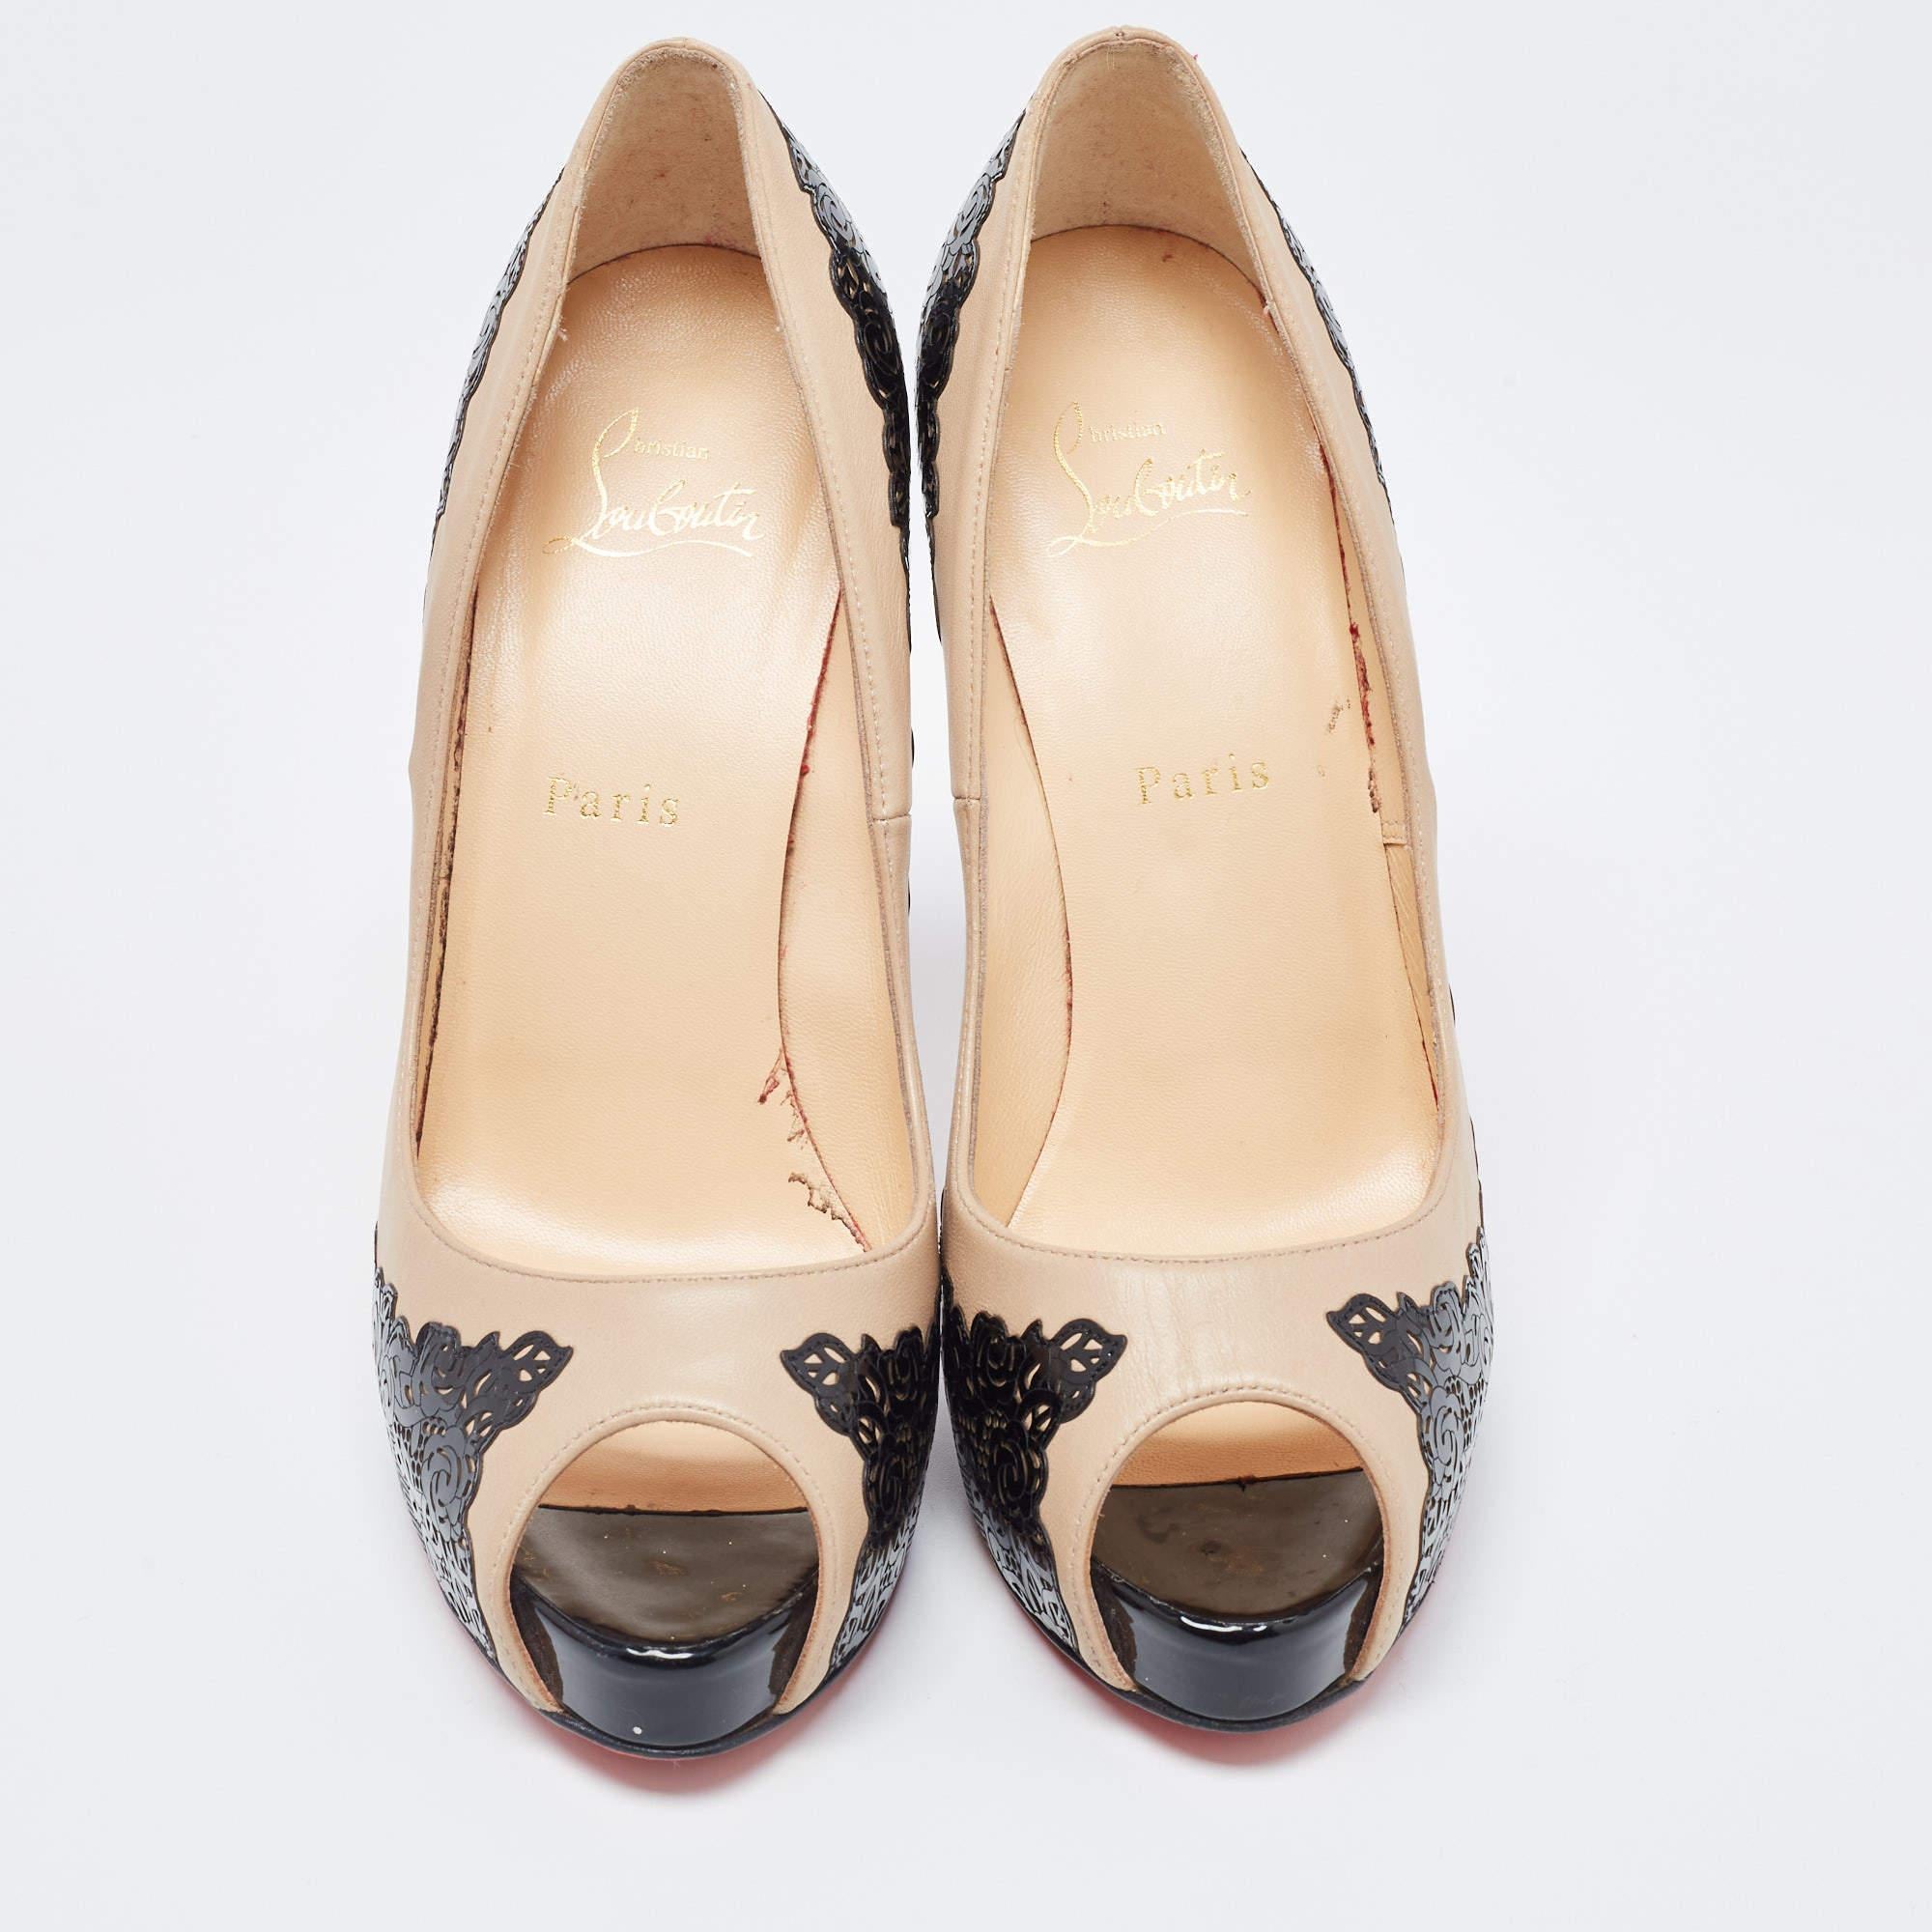 Christian Louboutin Laser Cut and Leather Veramucha Peep Toe Pumps Size 39 For Sale 1